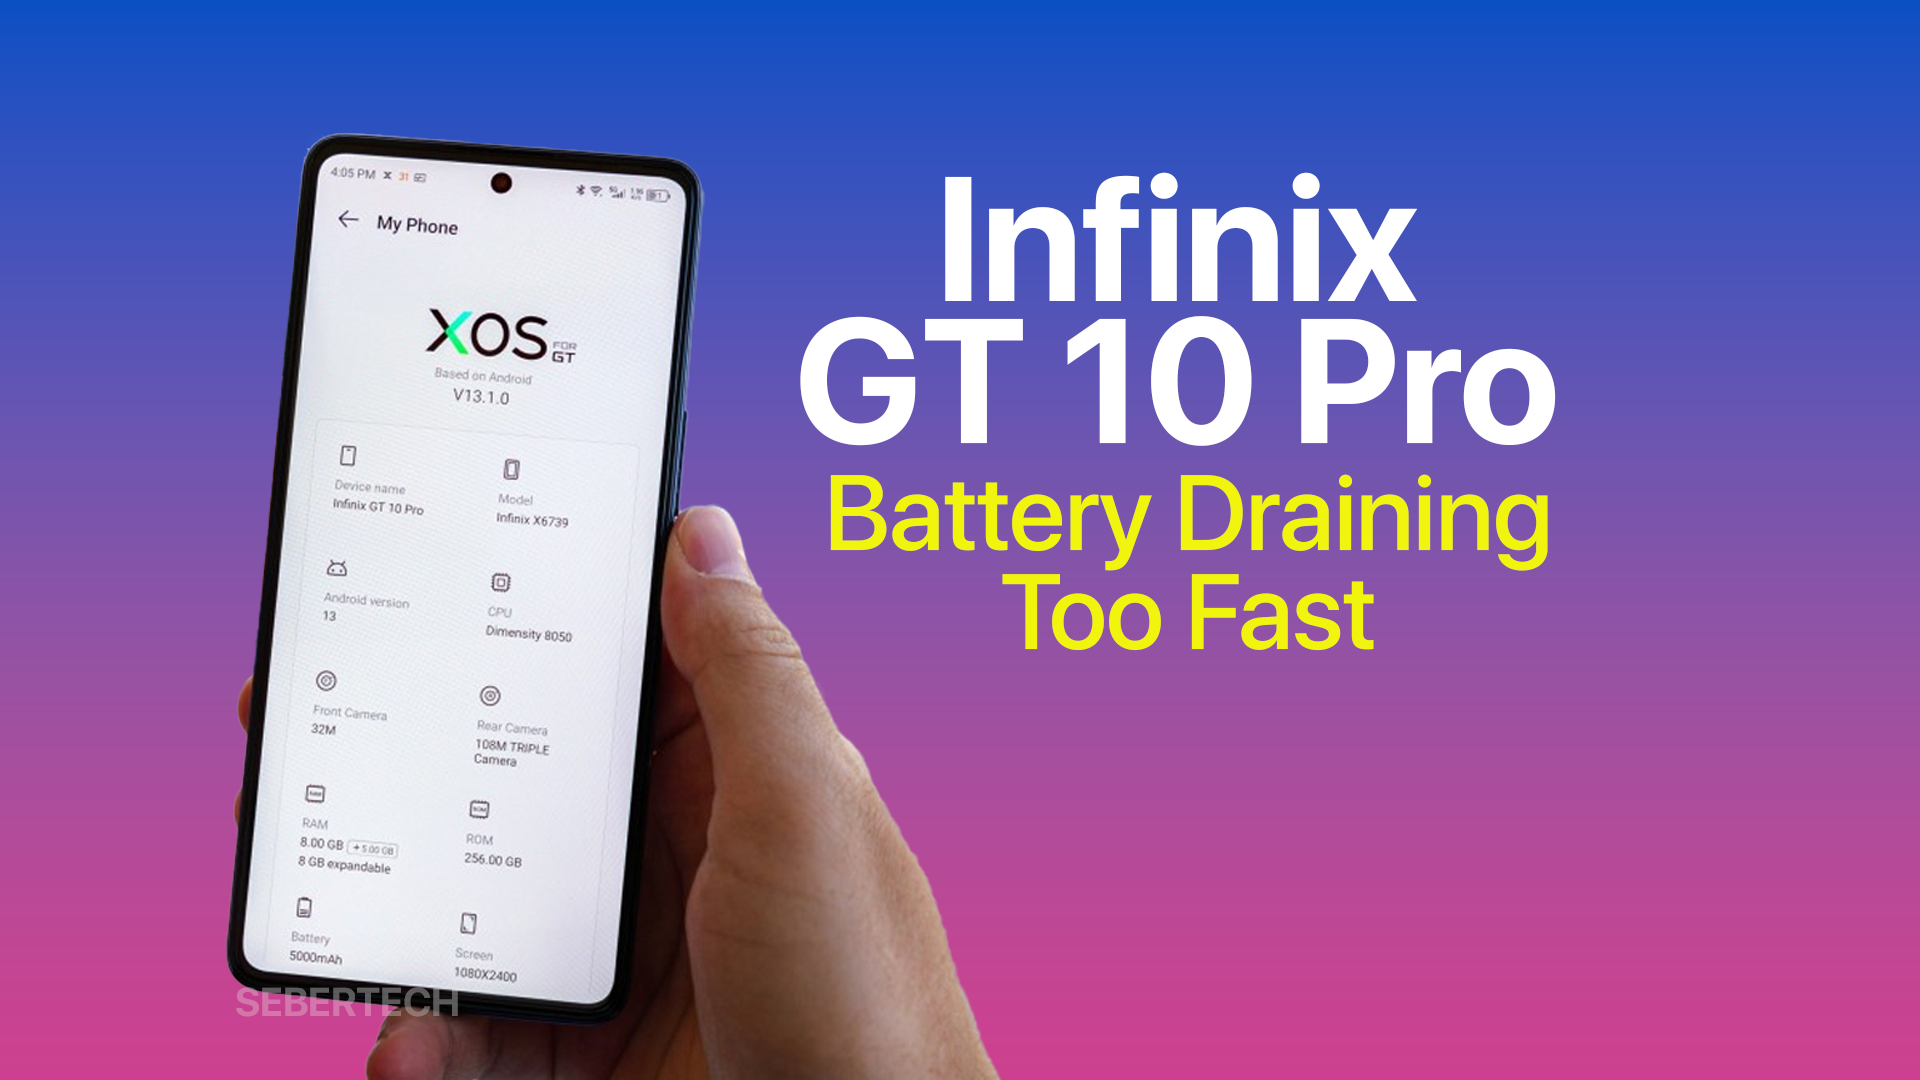 Infinix GT 10 Pro Battery Draining Too Fast